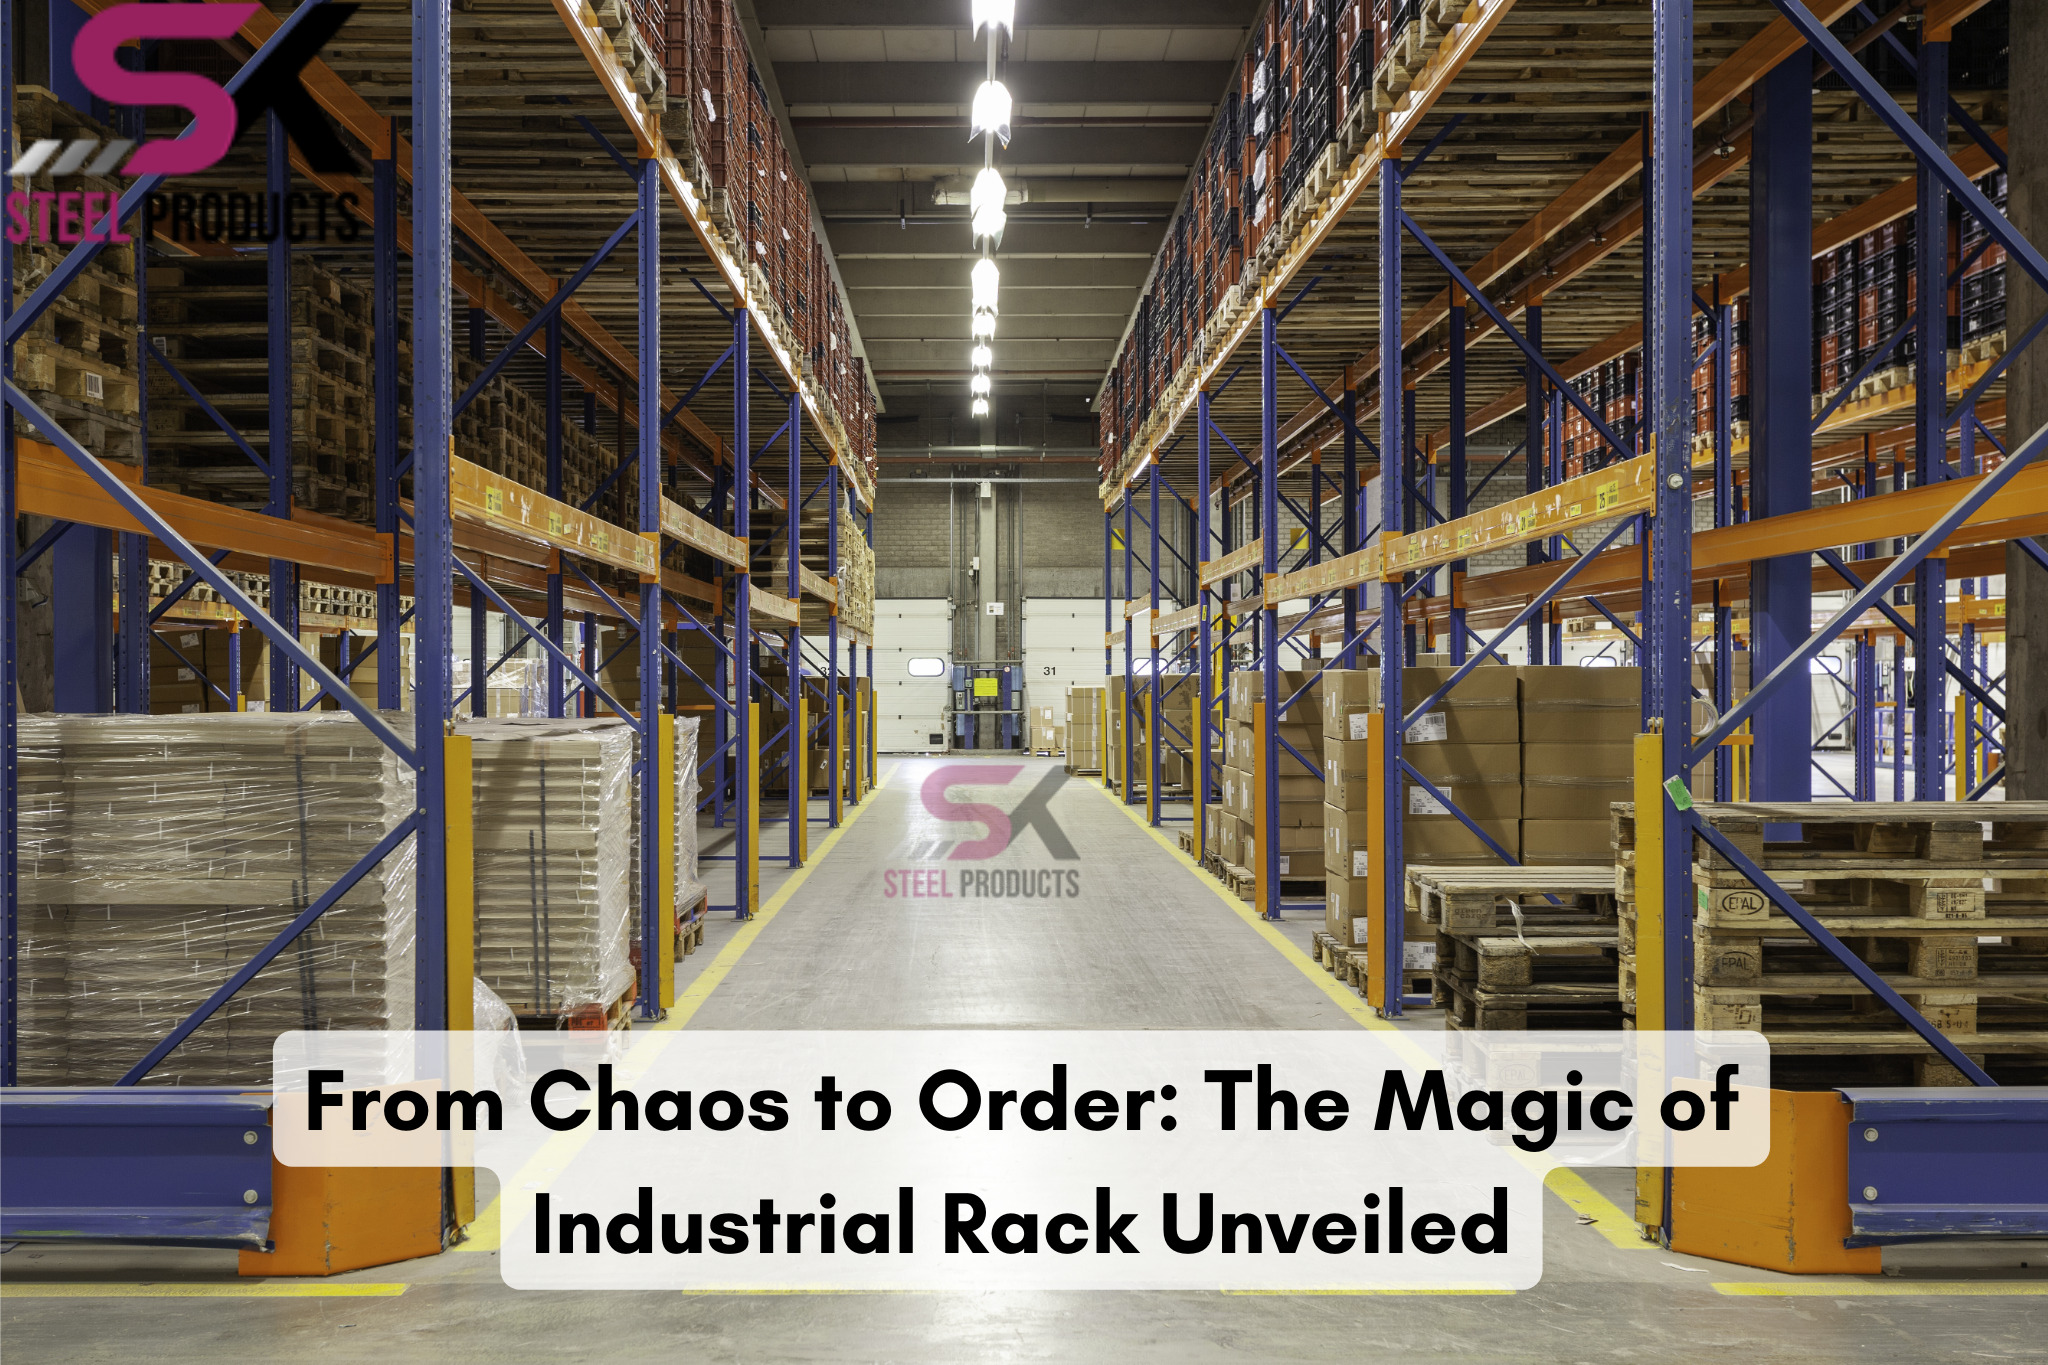 From Chaos to Order: The Magic of Industrial Rack Unveiled